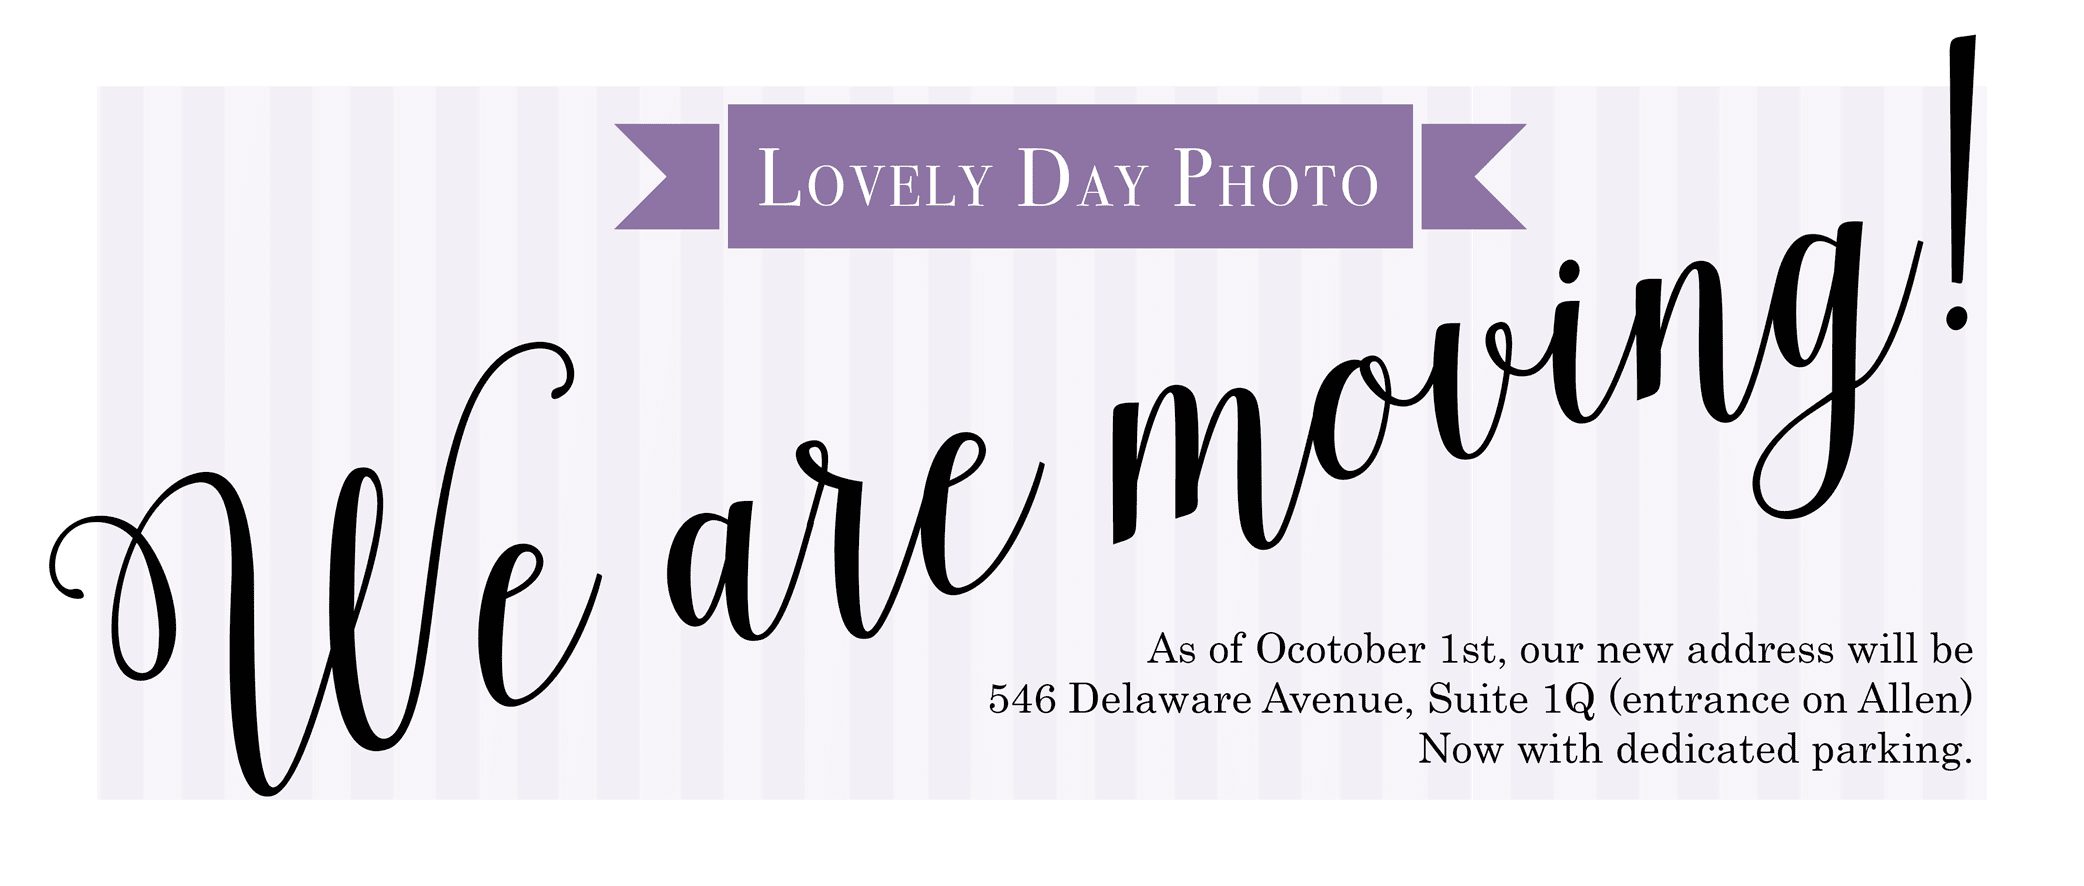 Moving notice for Lovely Day Photo in Buffalo New York